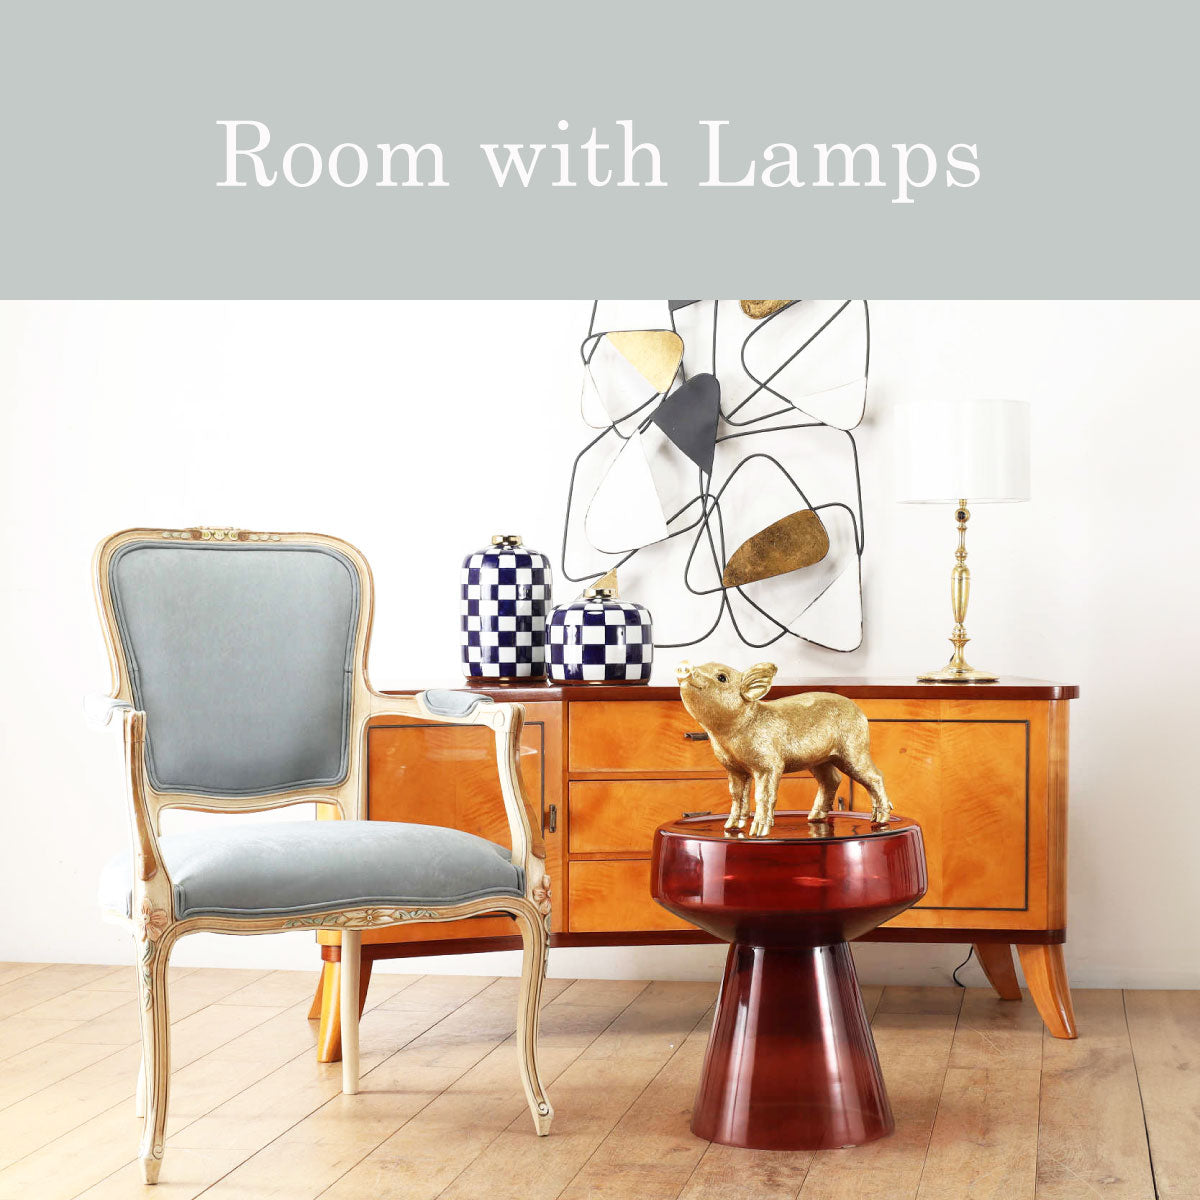 Room with Lamps